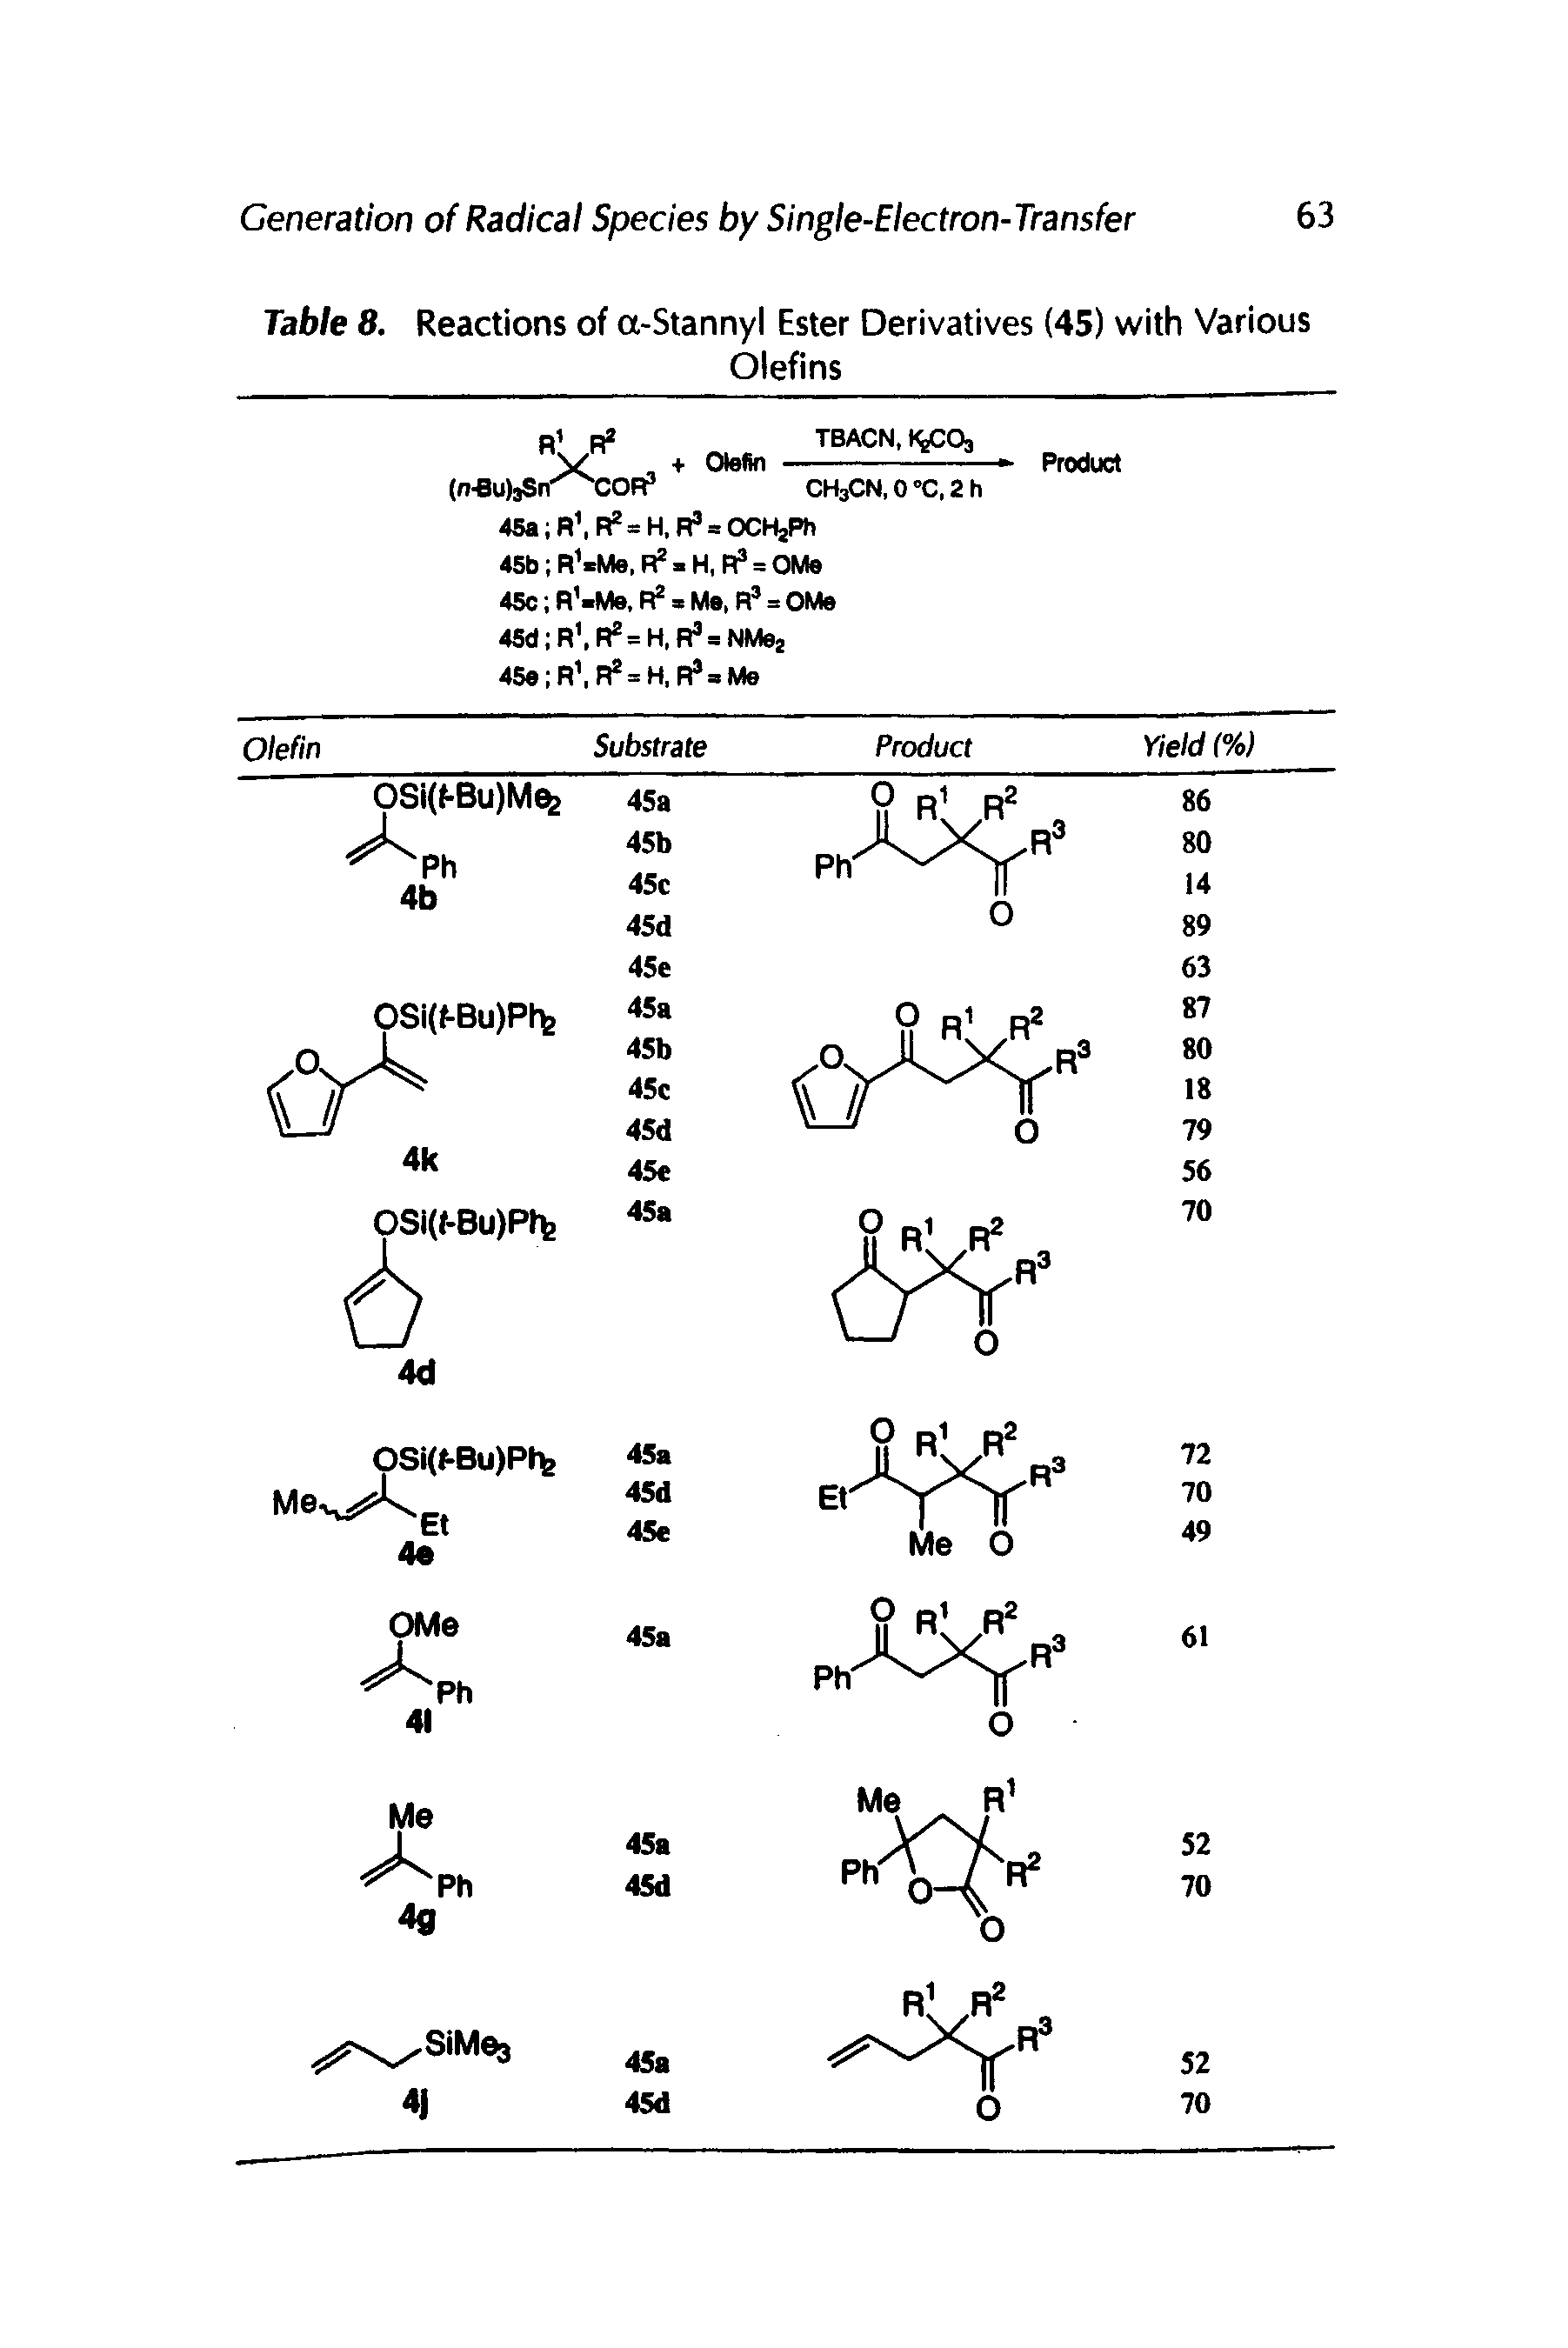 Table 8. Reactions of a-Stannyl Ester Derivatives (45) with Various...